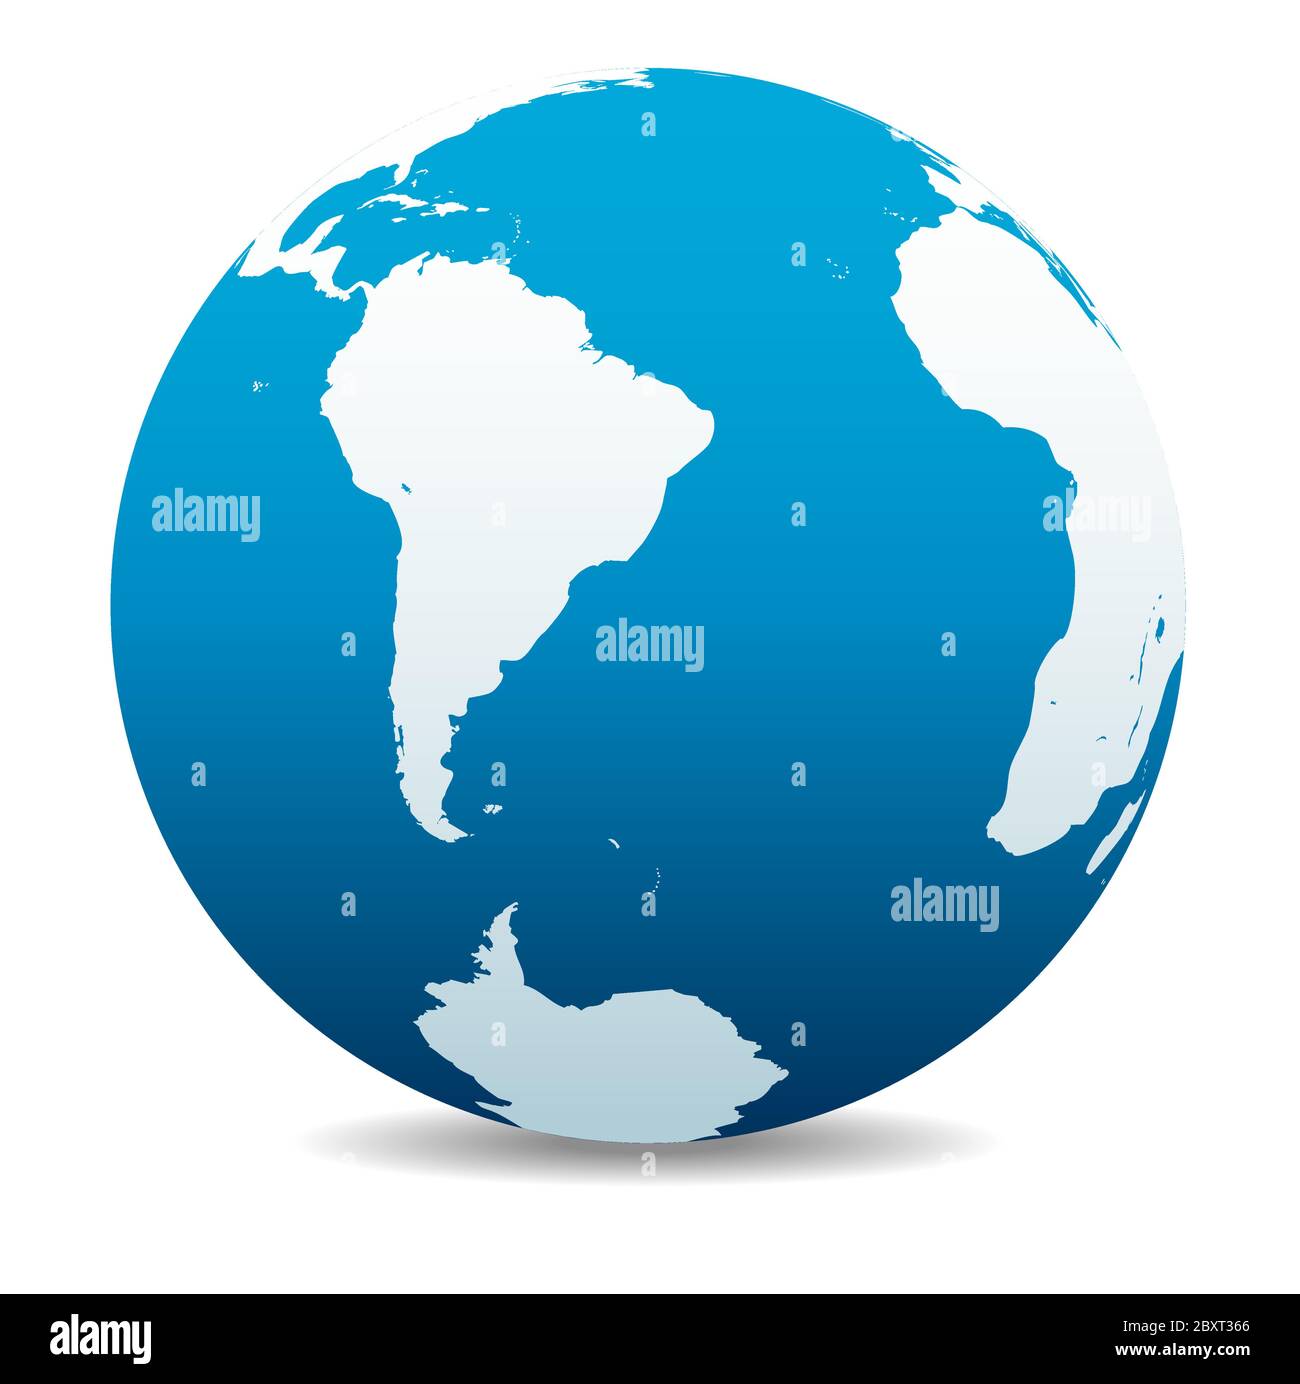 South America, South Pole and Africa Vector Map Icon of the World Globe, Earth. All elements are on individual layers in the vector file. Stock Vector